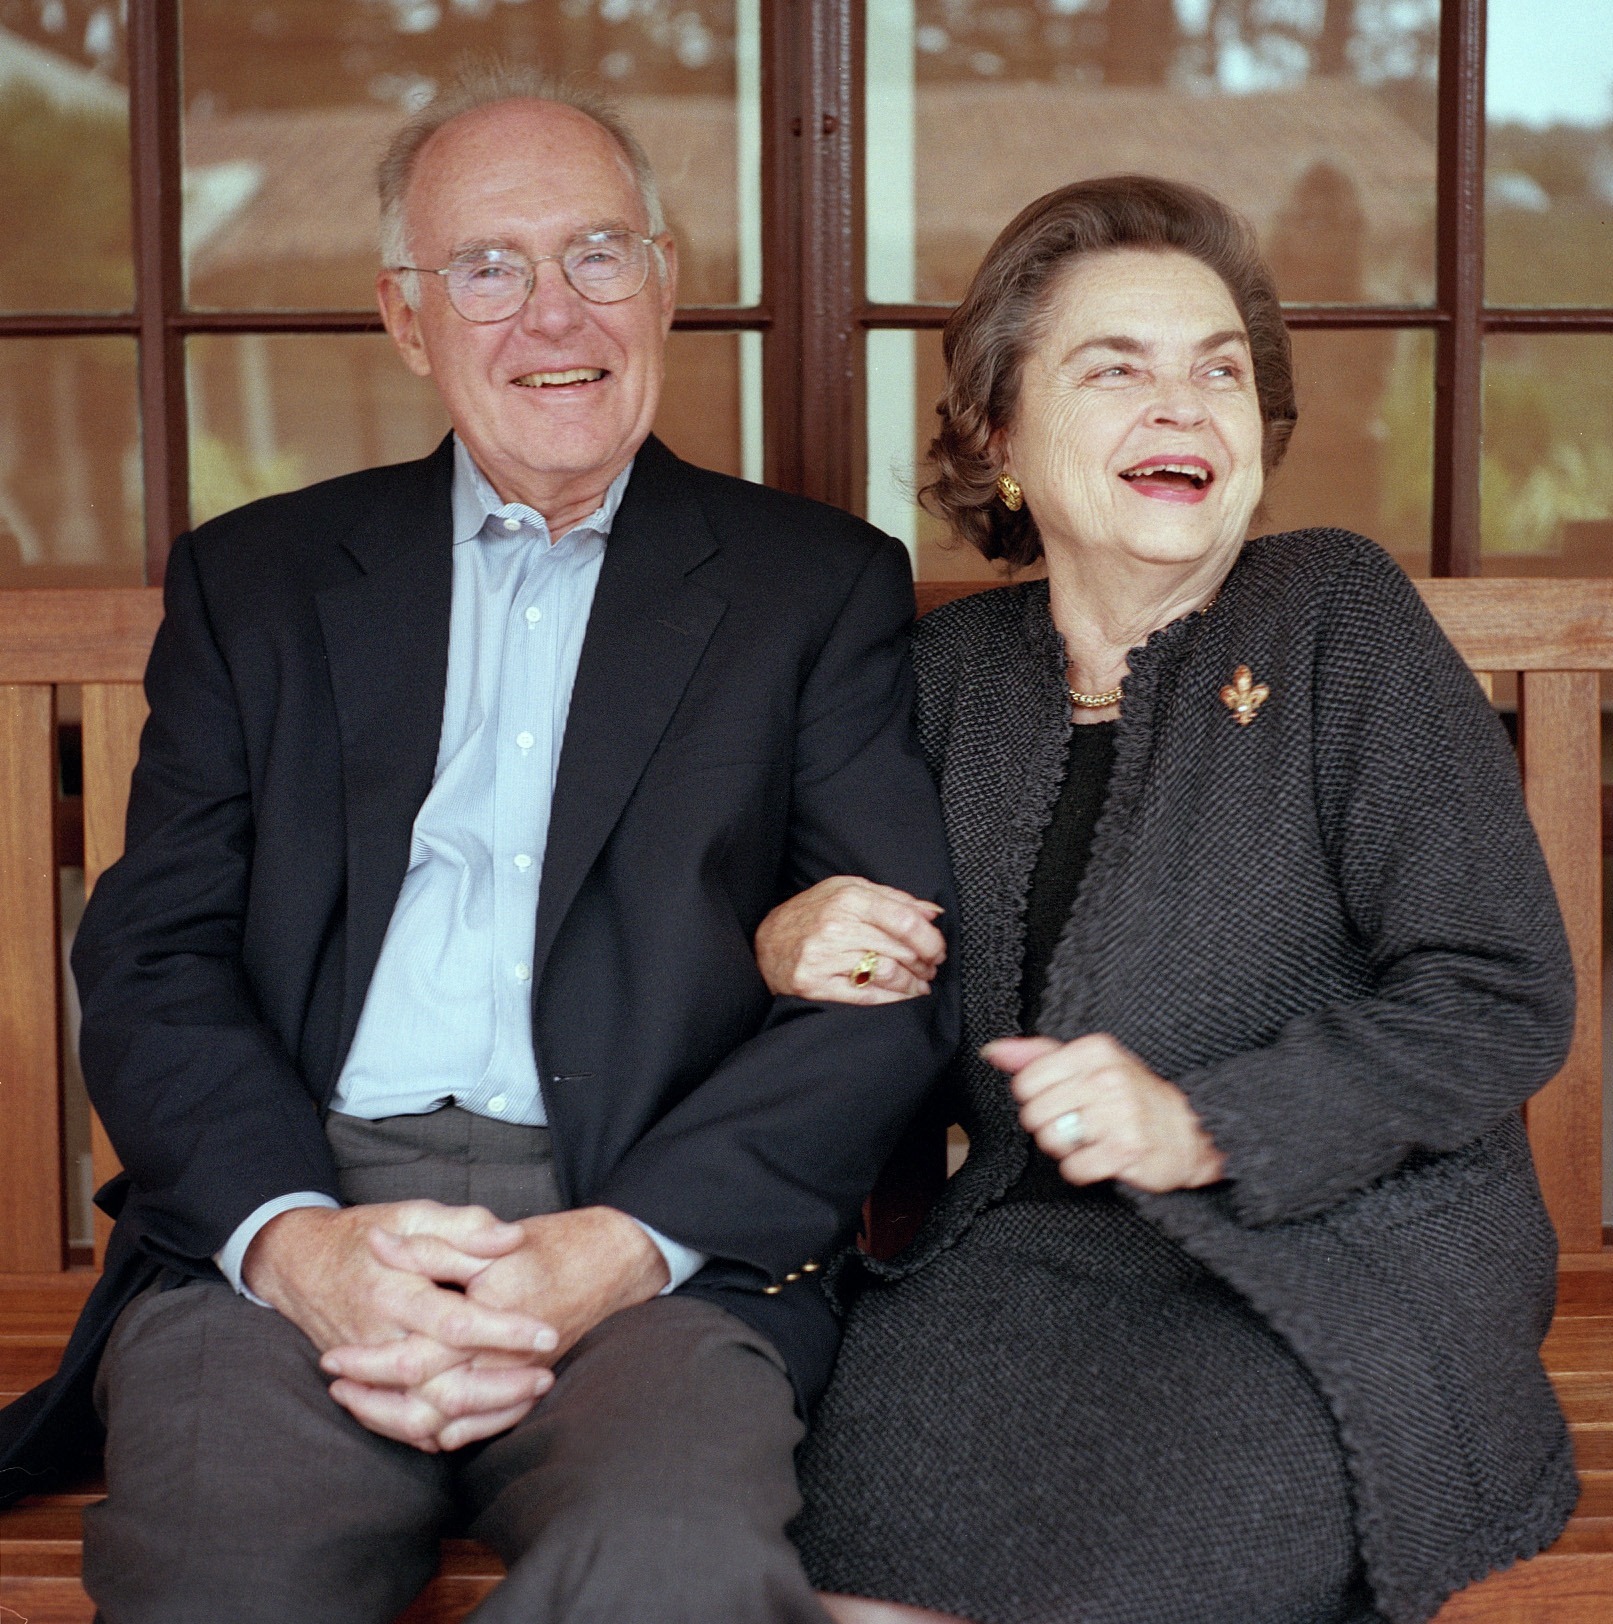 Gordon and Betty Moore laughing